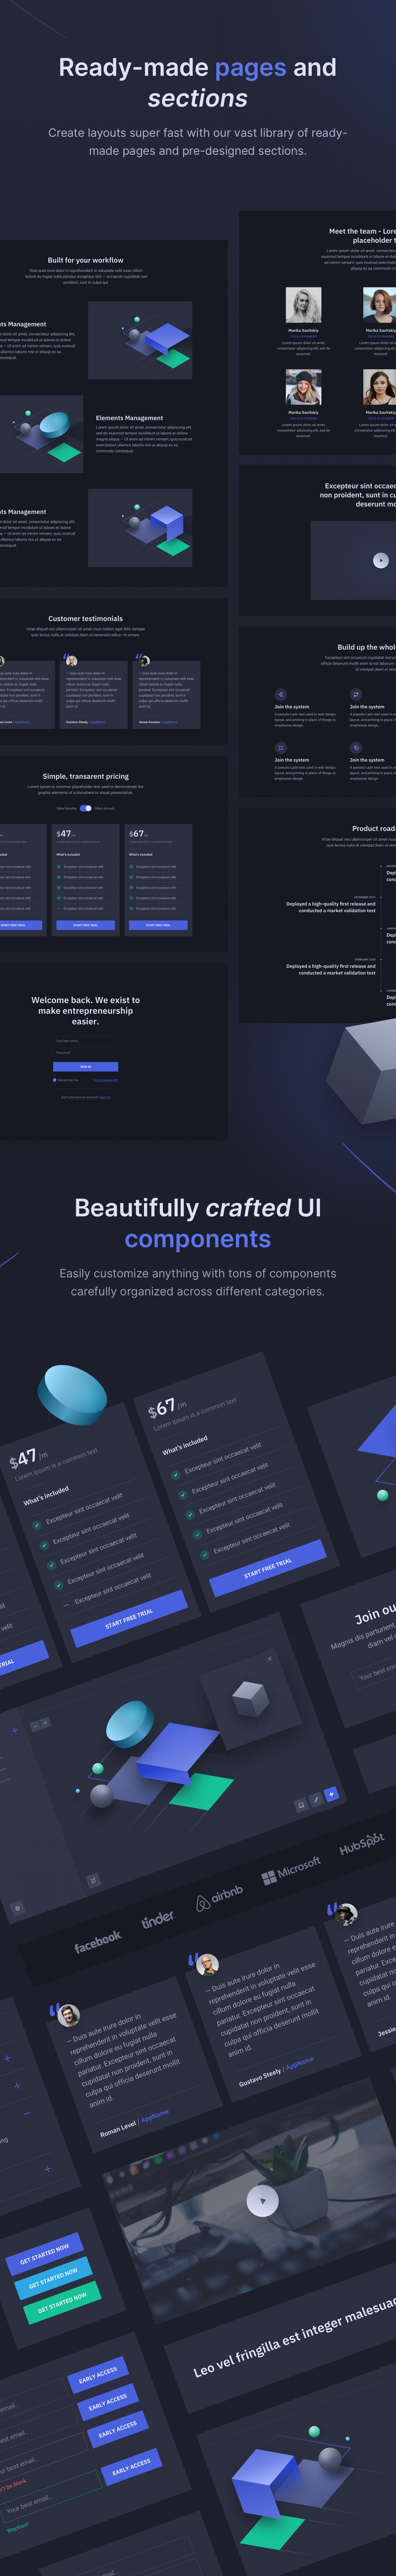 Cube - HTML landing page template for startups - 2